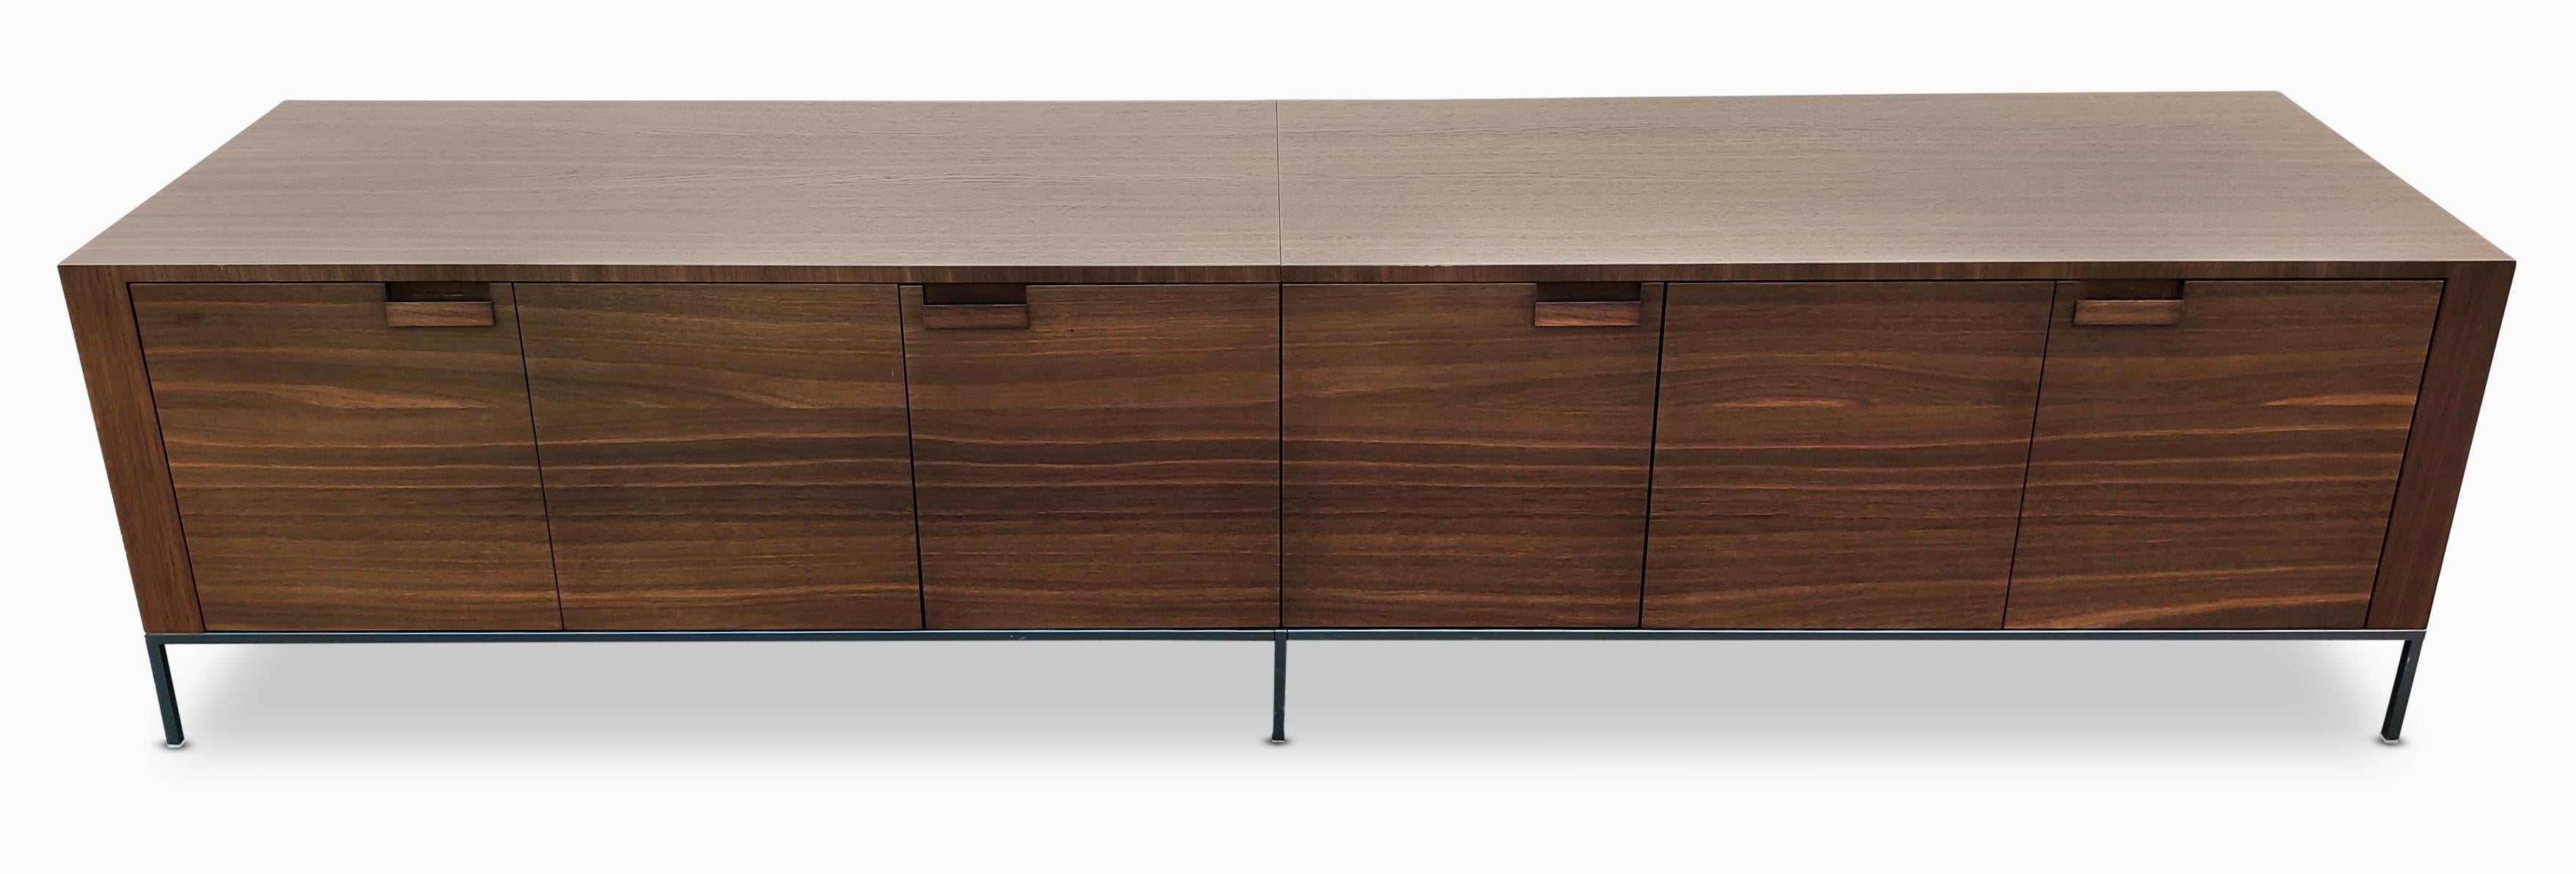 Description: A generously sized cabinet or credenza in beautiful and exotic wenge. Having 2 swing out doors, and 2 bifold doors, opening to 4 cubbies for storage. Set upon bronzed-steel frame/legs. This sleek and stylish cabinet, credenza or